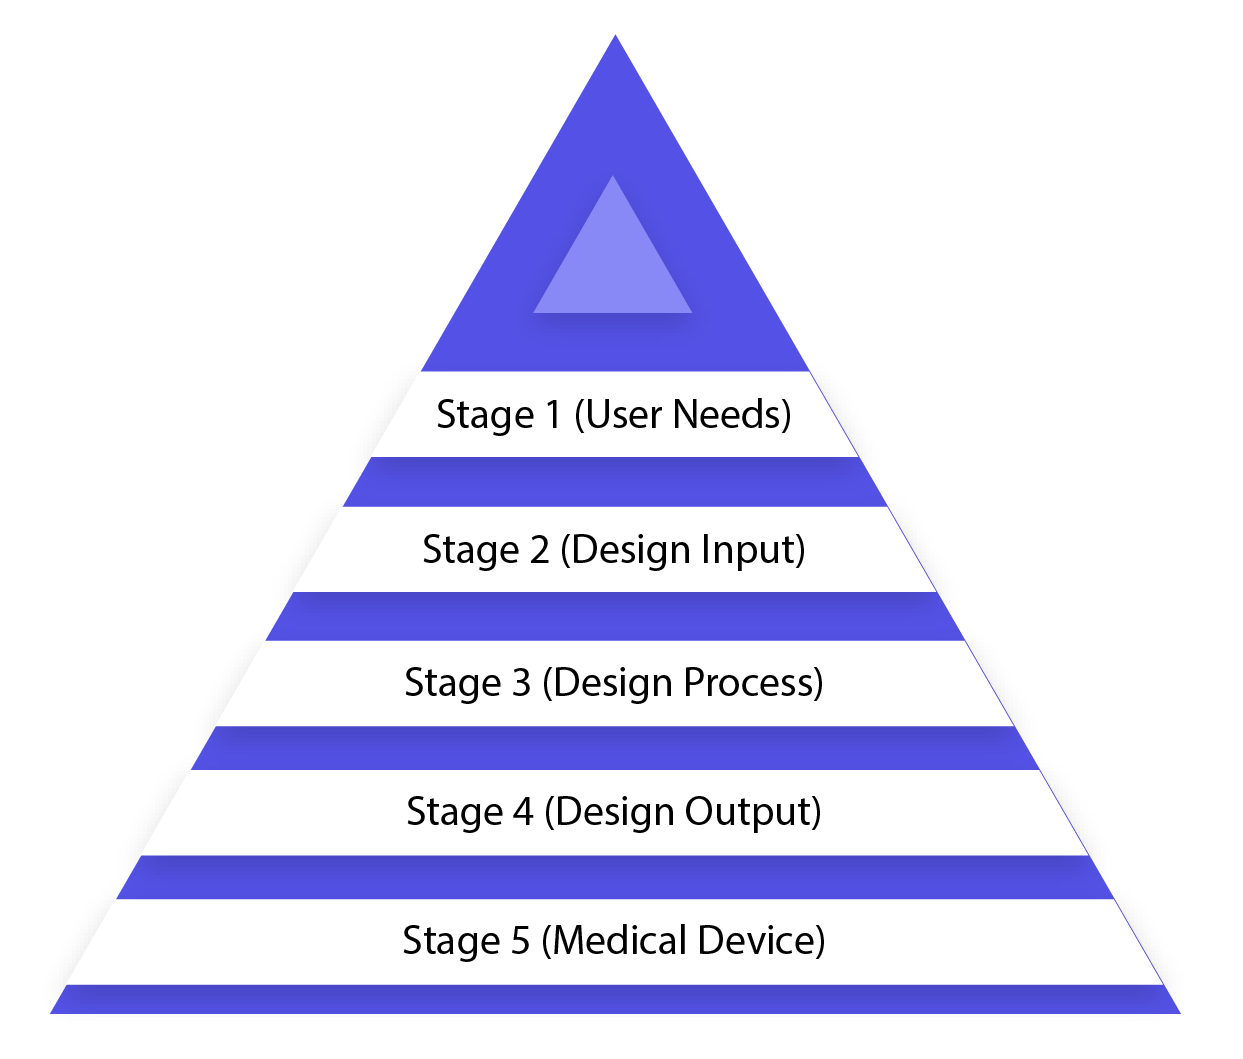 medical device product development process